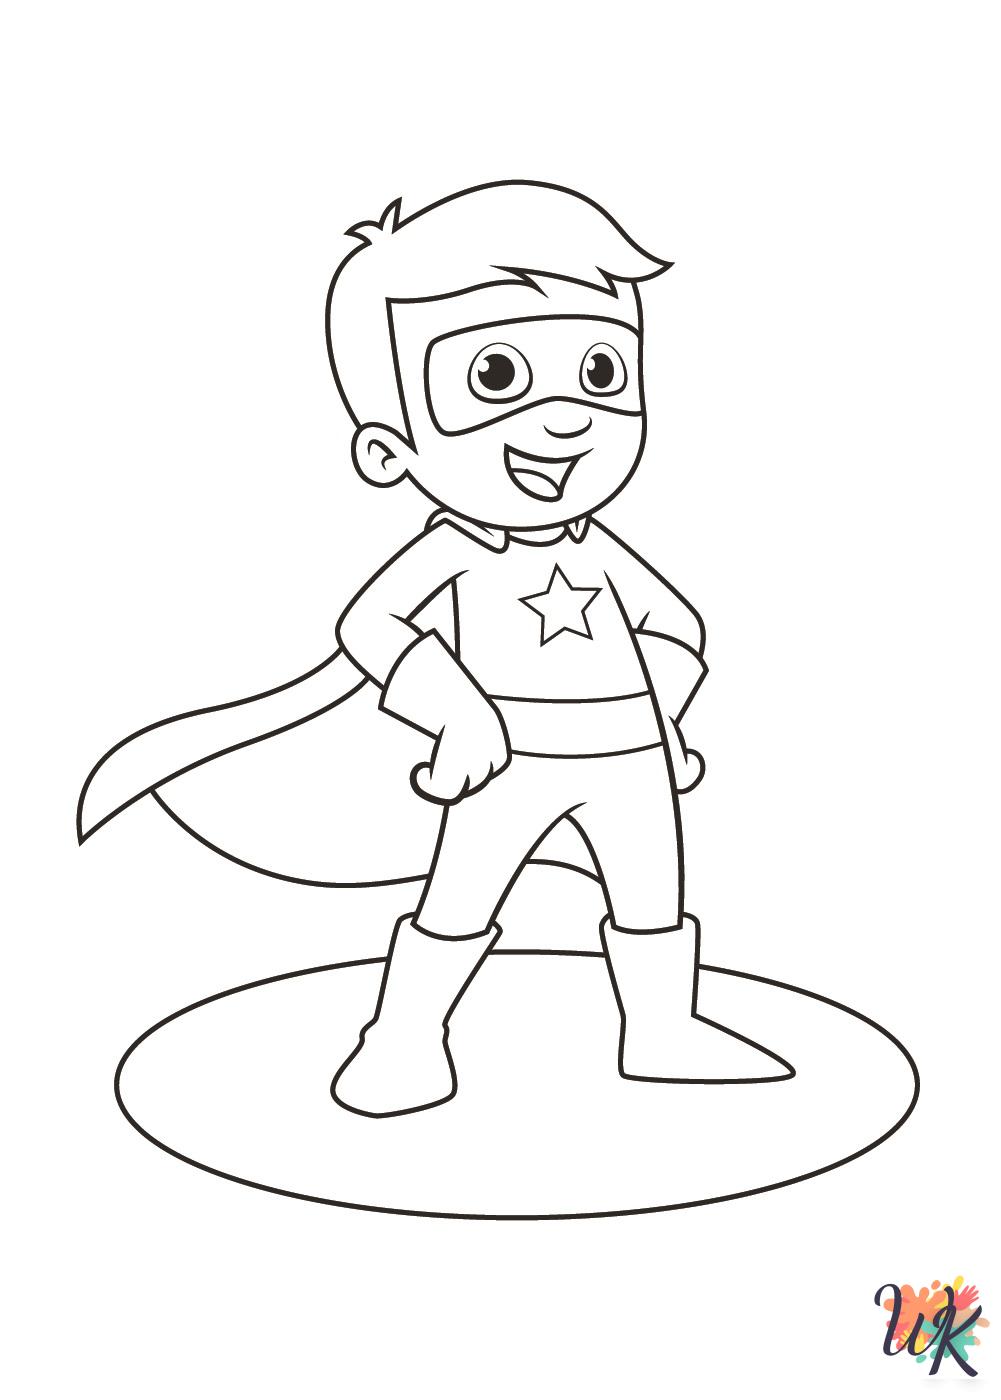 detailed Superhero coloring pages for adults